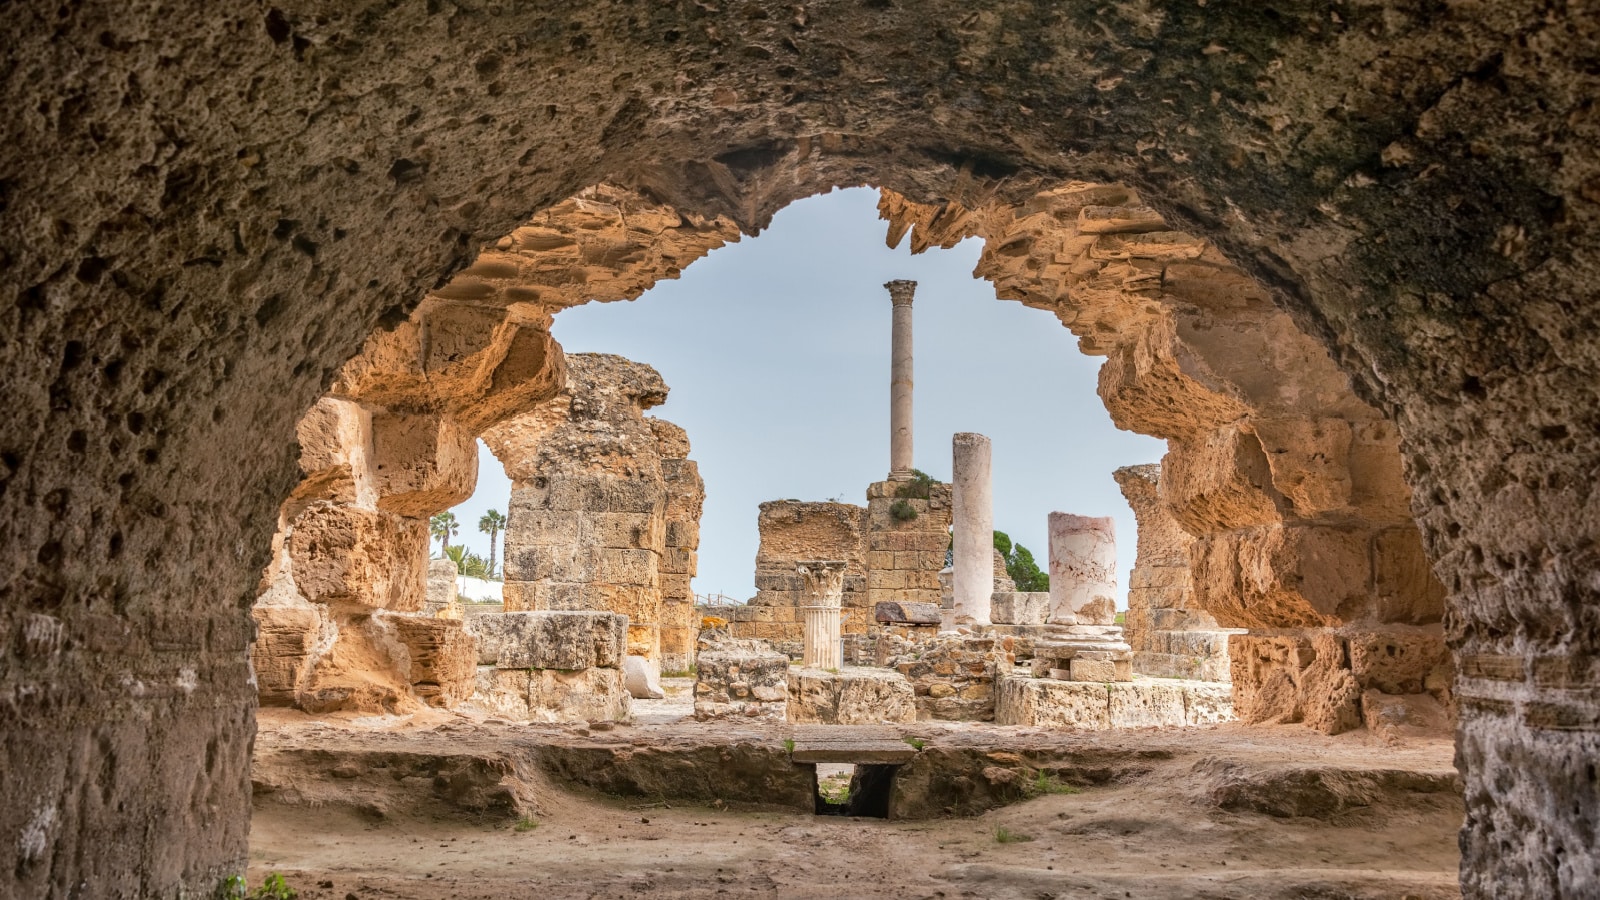 View of the Antonine Baths in the ancient city of Carthage, Tunisia